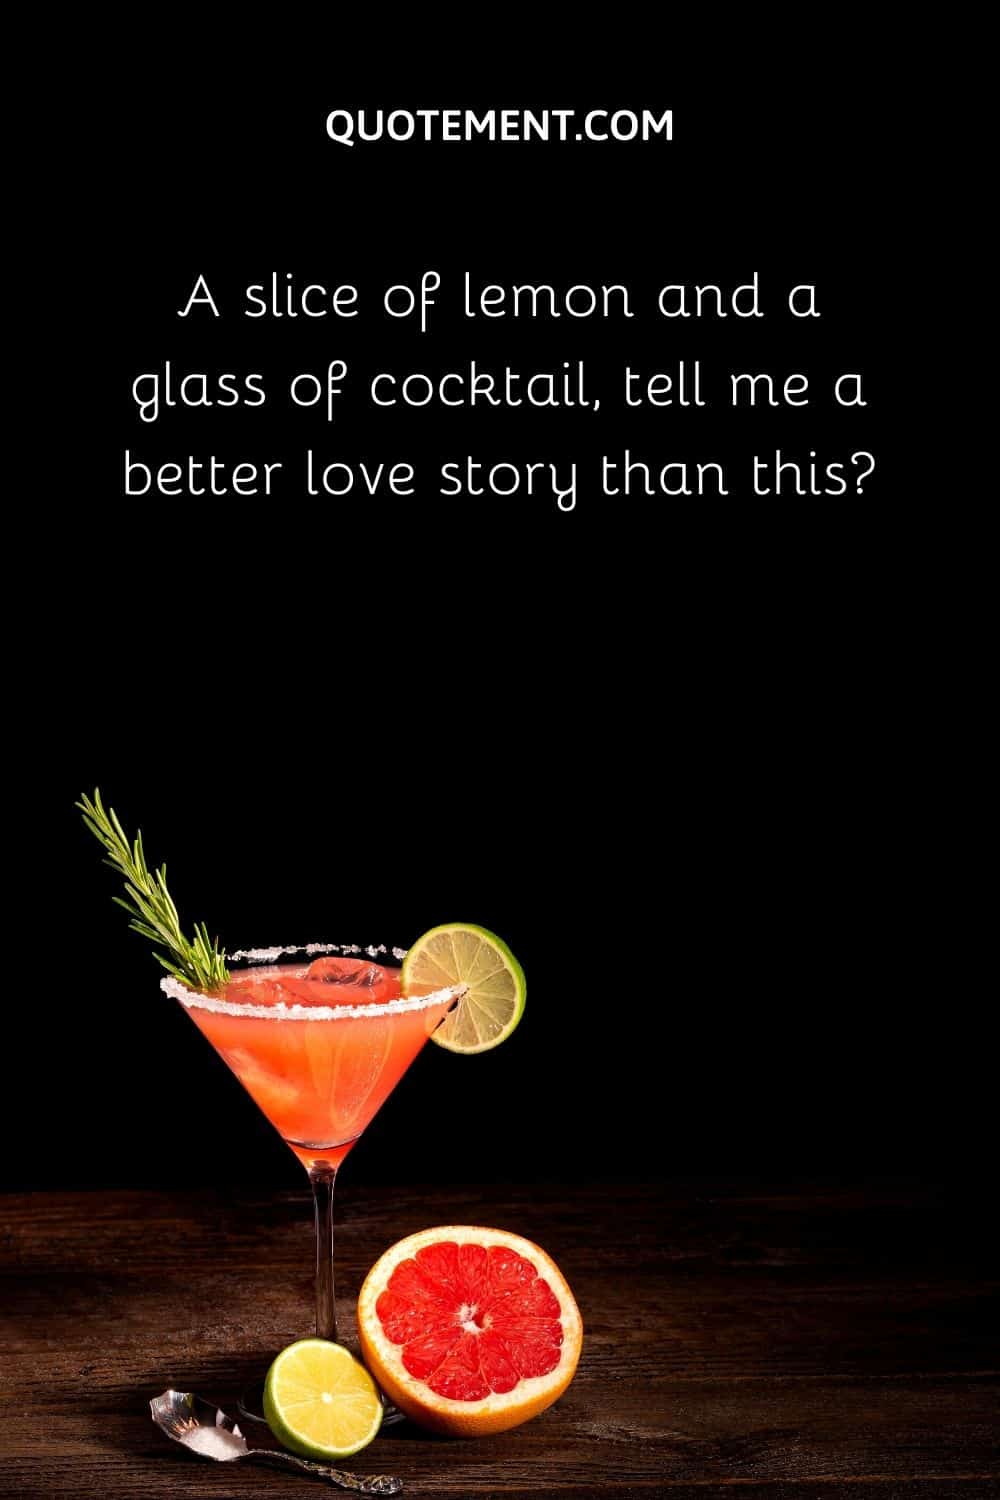 A slice of lemon and a glass of cocktail, tell me a better love story than this